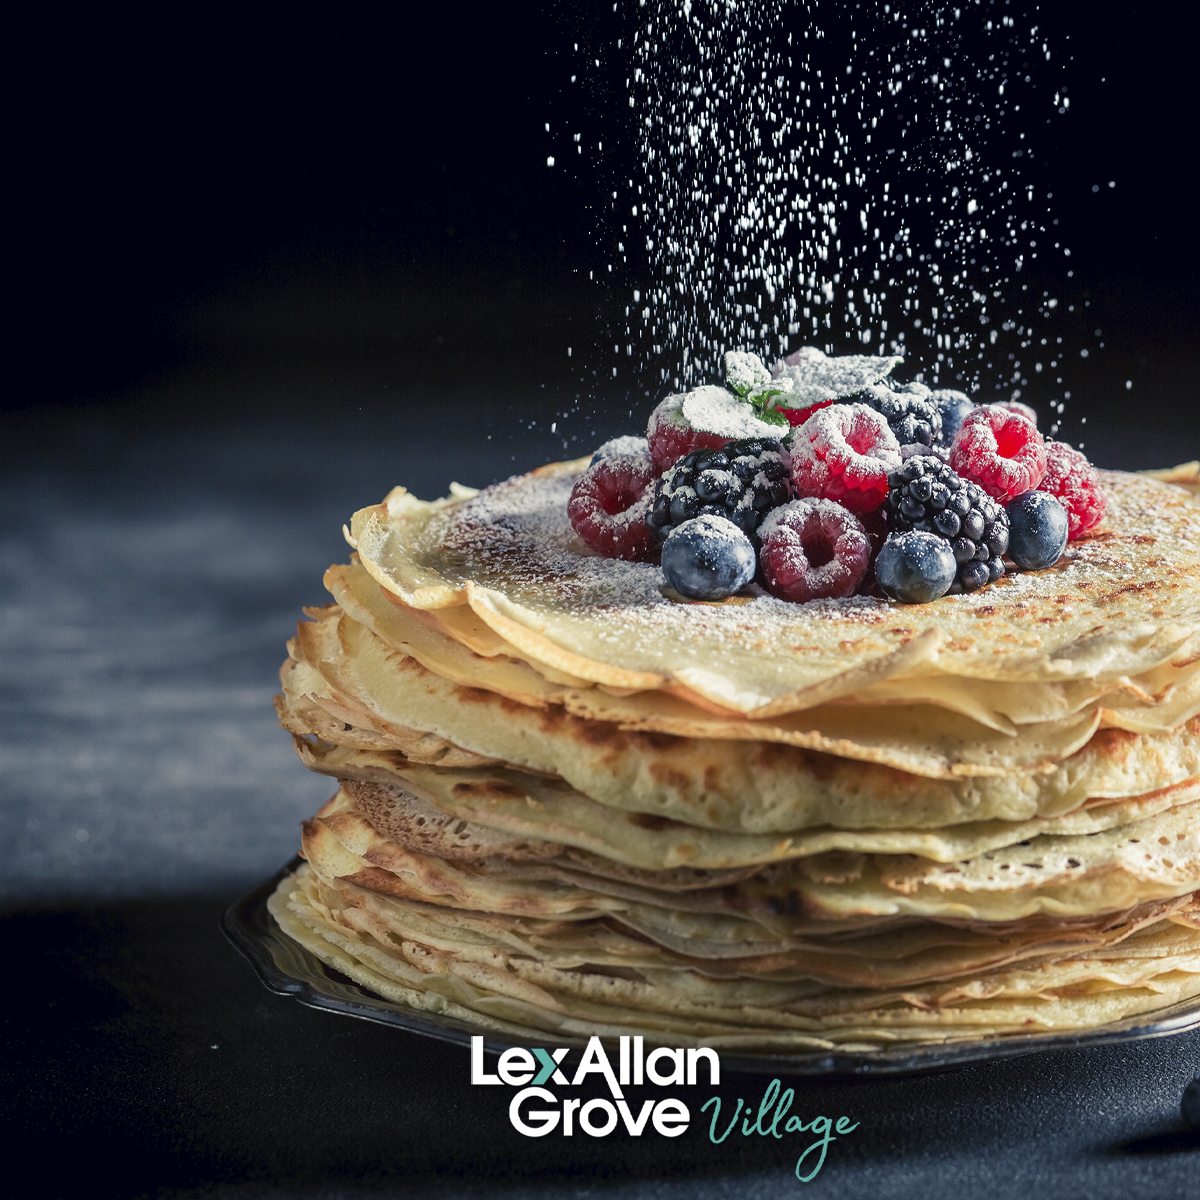 🥞 Happy #Pancake Day! 🥞
Does selling your home feel a bit flat? Flip to a marketing strategy that really stacks up!

Call our team on 01562 270270

#Property #EstateAgents #ExceedingExpectations #Hagley #Worcestershire #westmidlands #Birmingham

lexallan.co.uk/our-offices/ha…